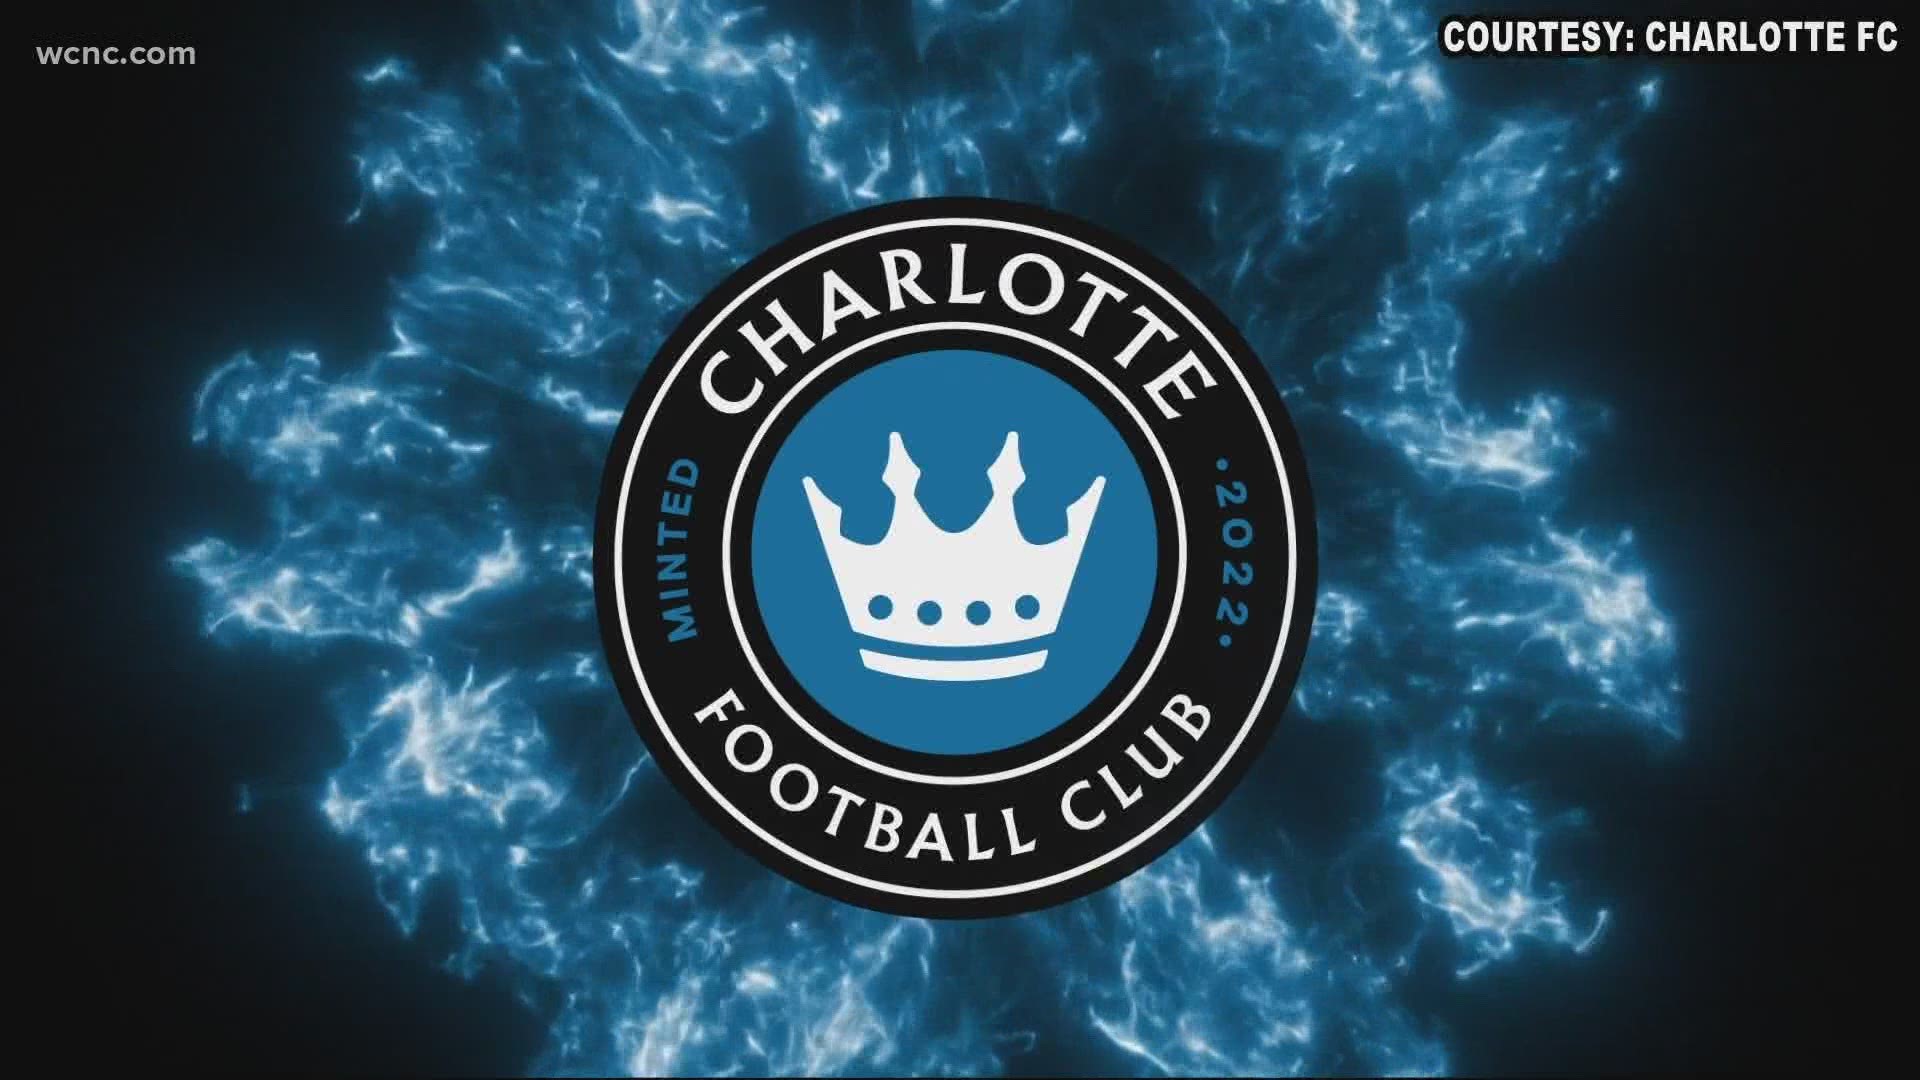 Charlotte FC delayed its debut season in 2022 because of COVID-19